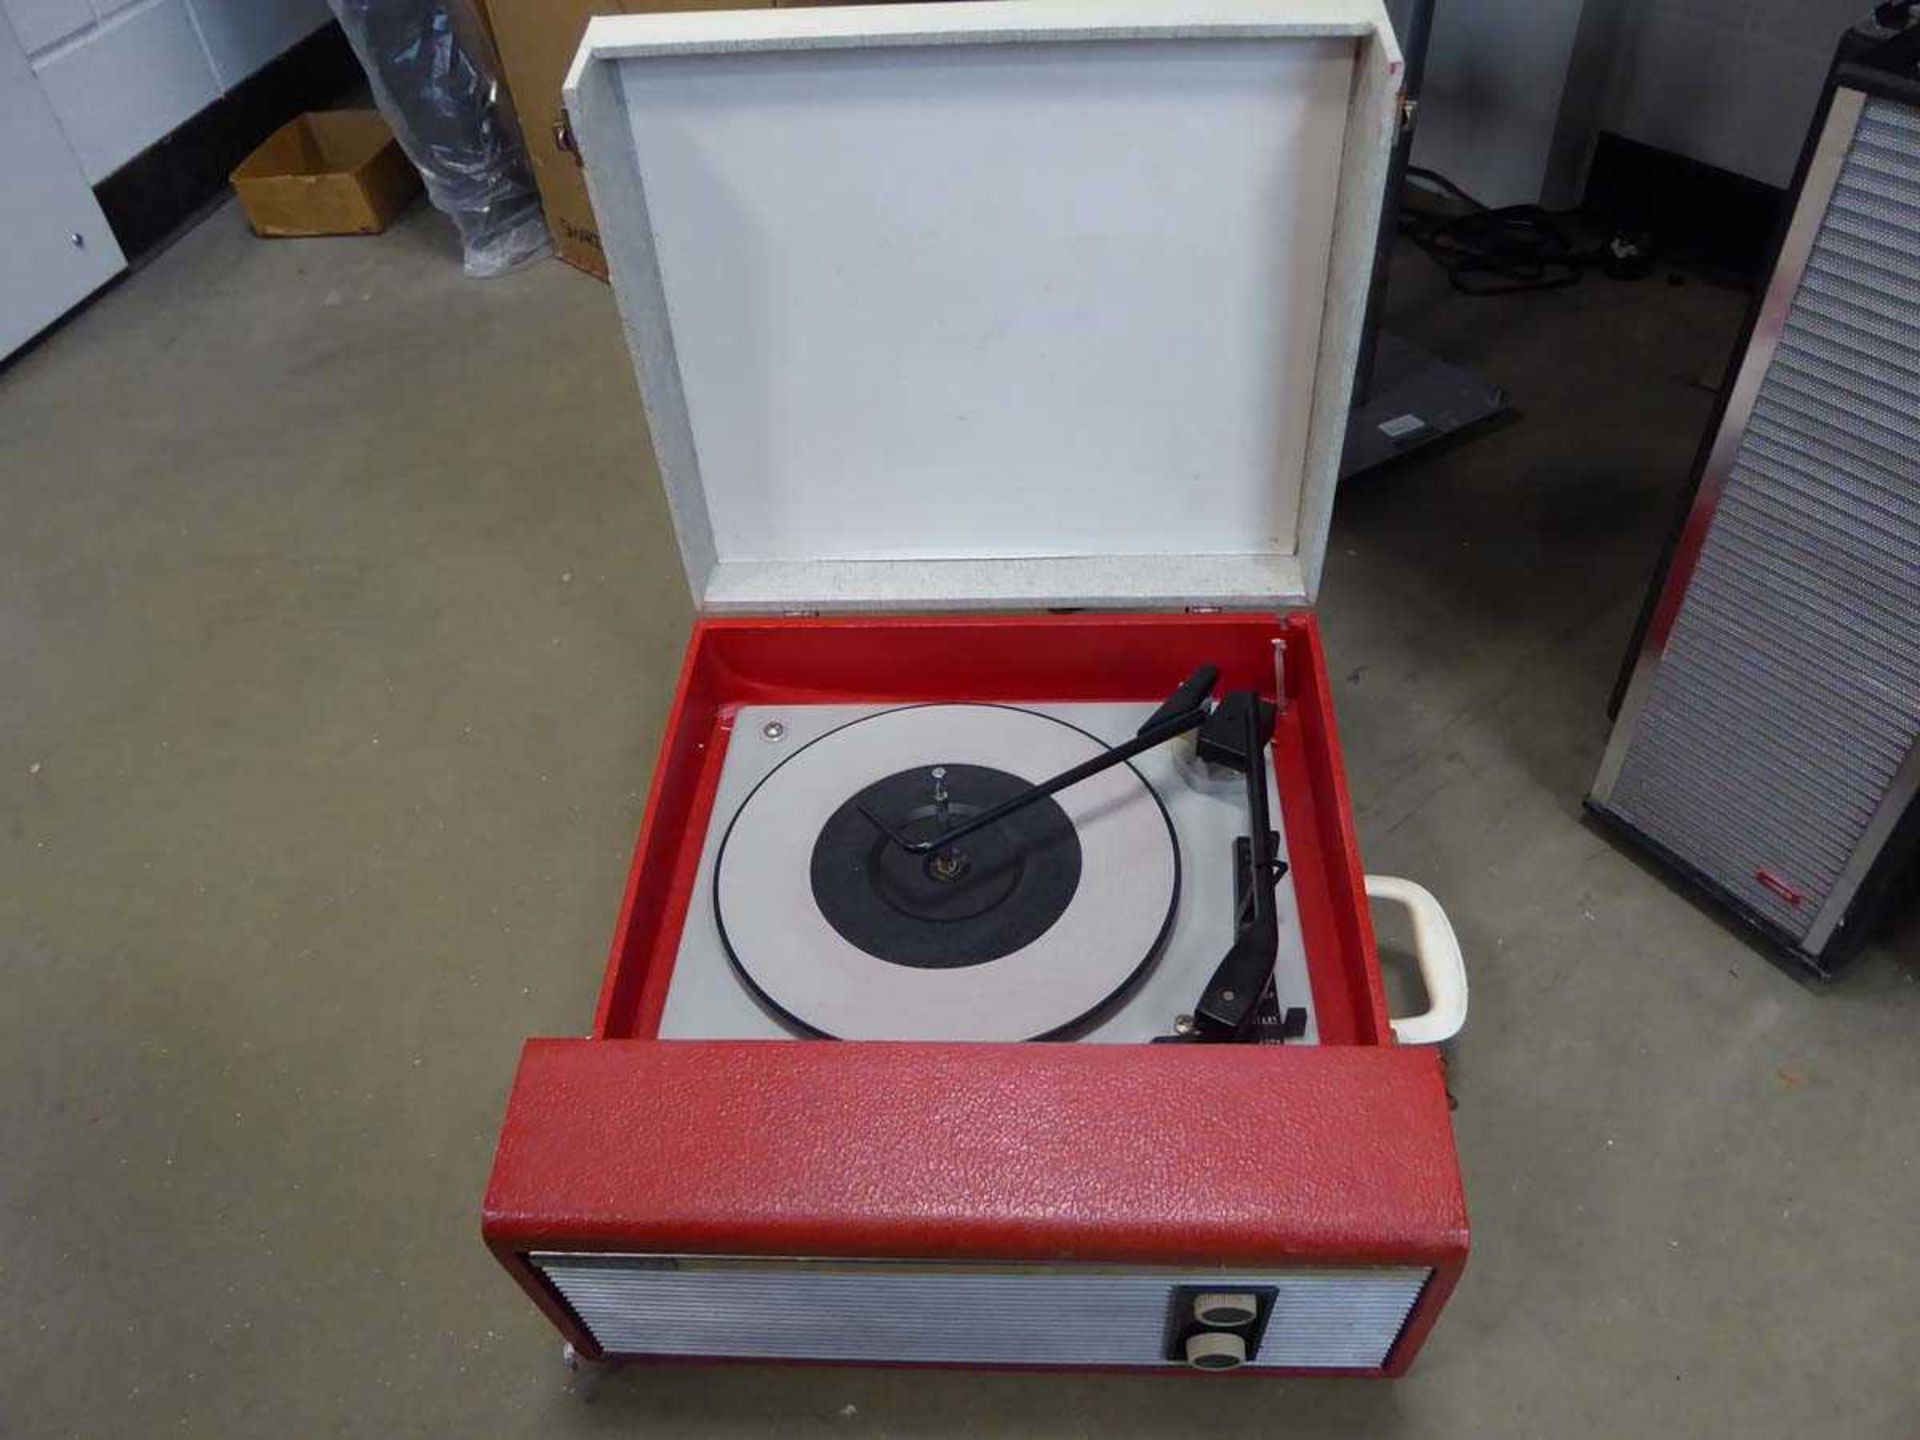 Fidelity record player